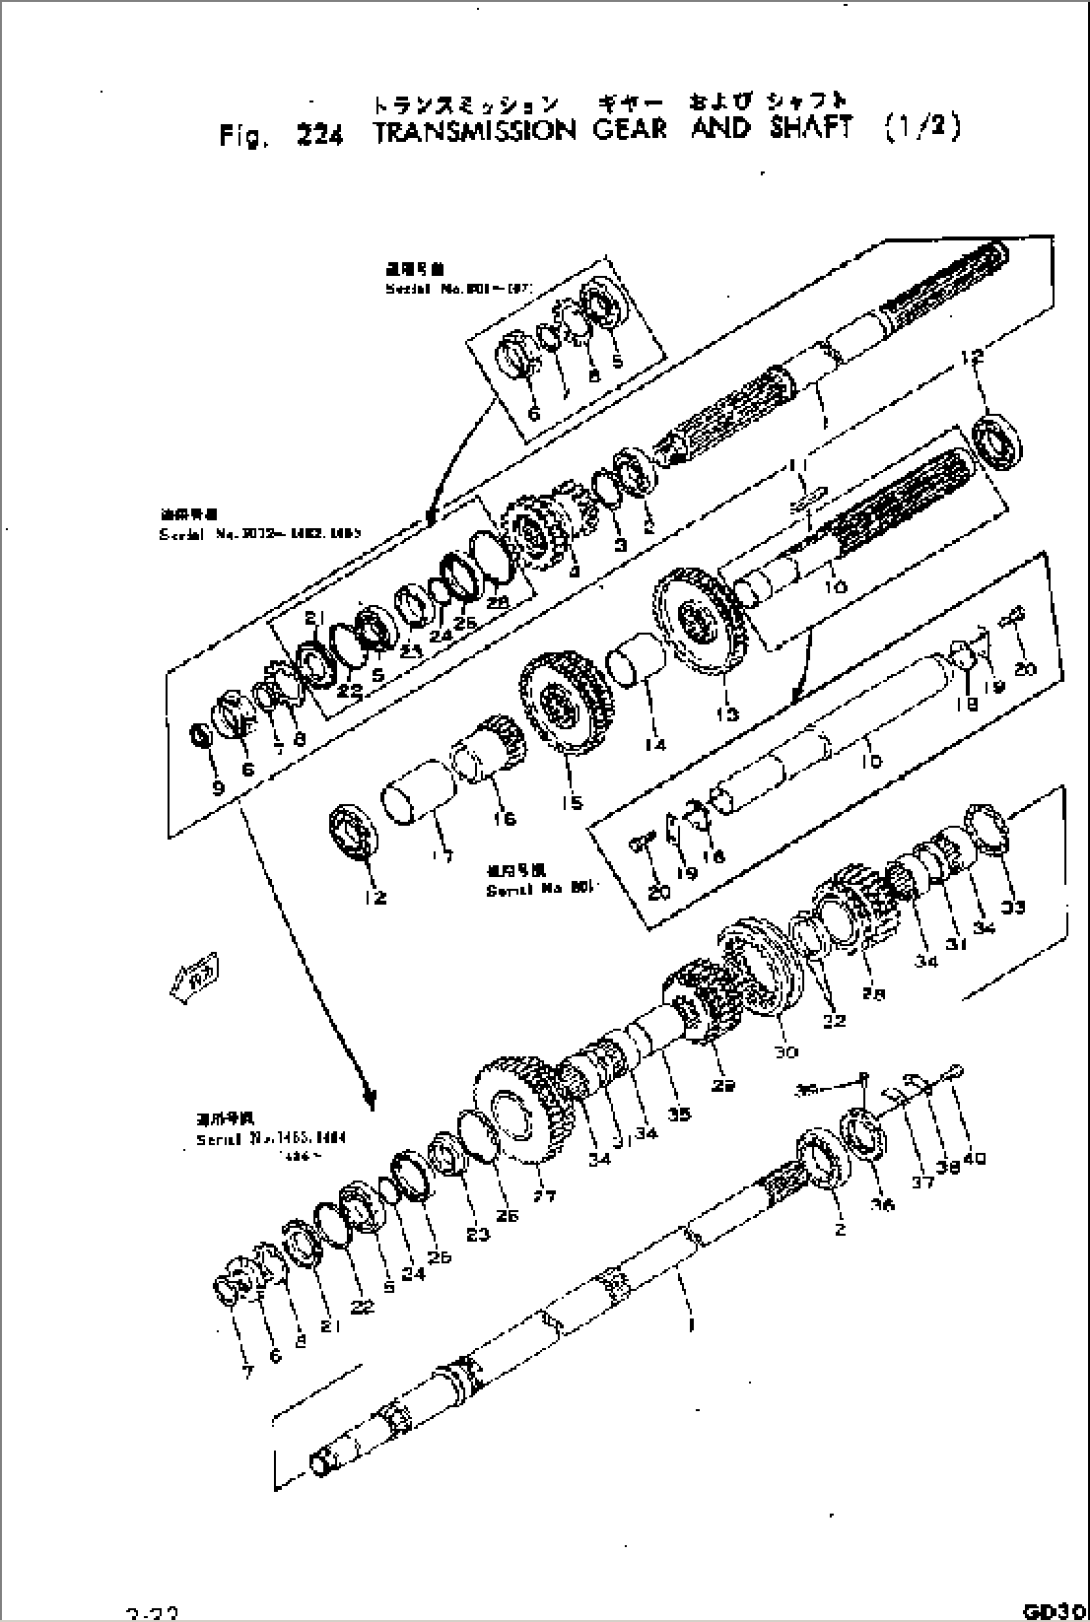 TRANSMISSION GEAR AND SHAFT (1/2)